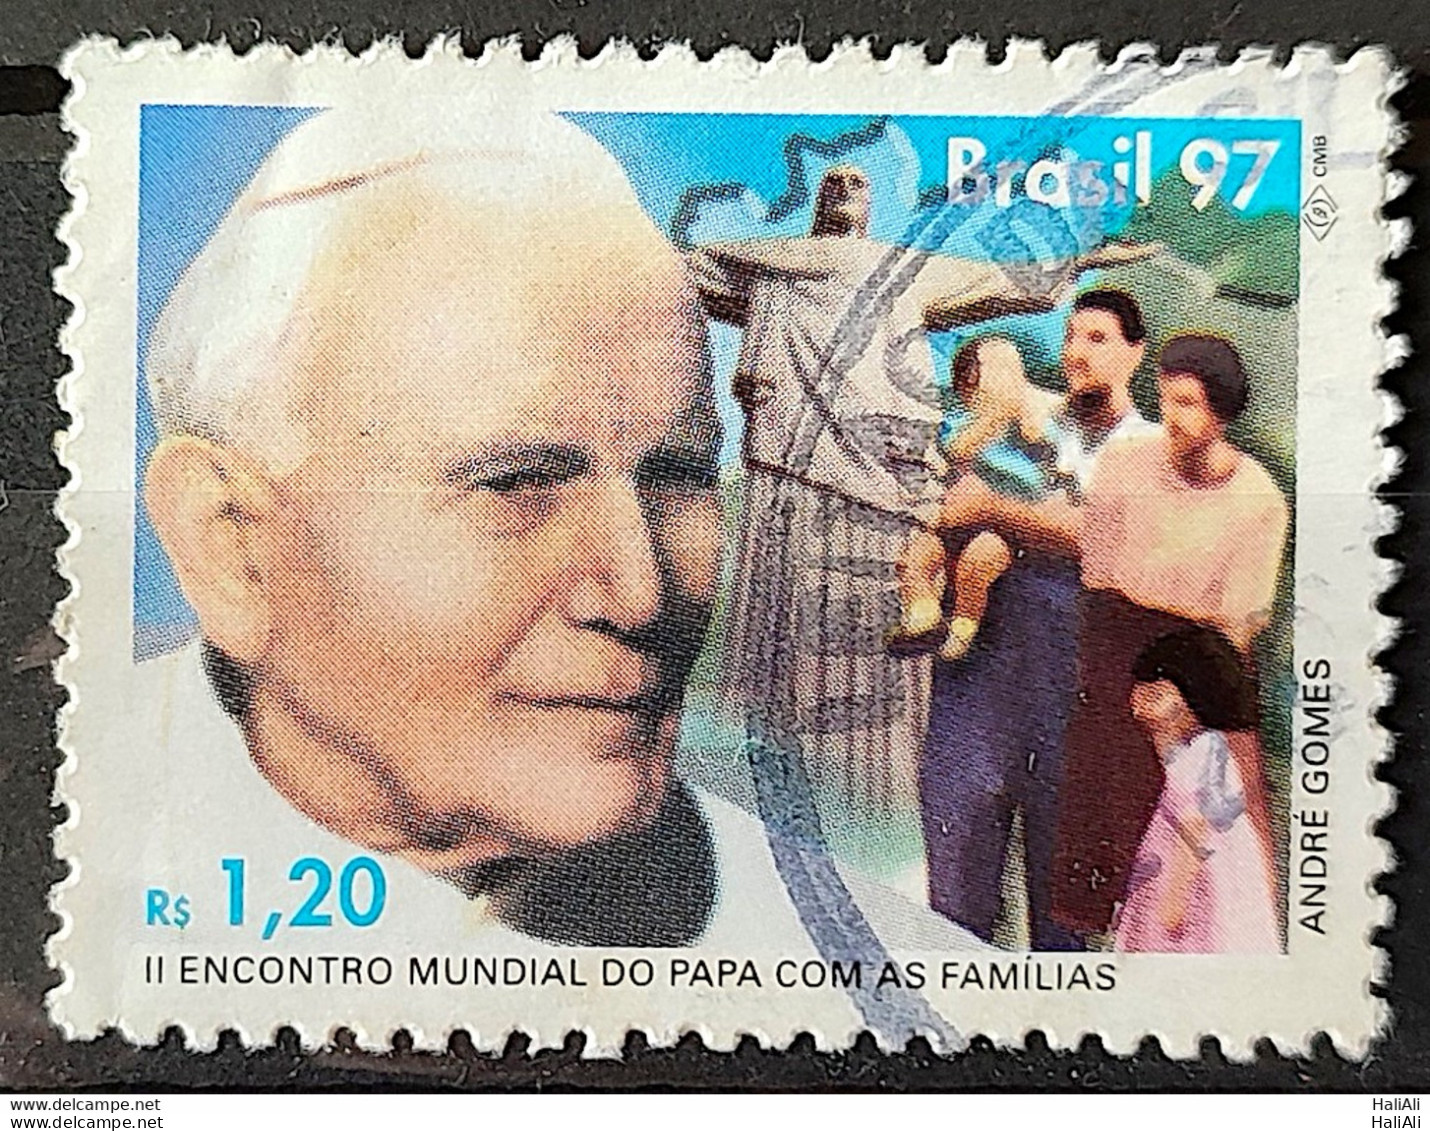 C 2043 Brazil Stamp World Pope Meeting With Families Religion 1997 Circulated 8 - Gebraucht